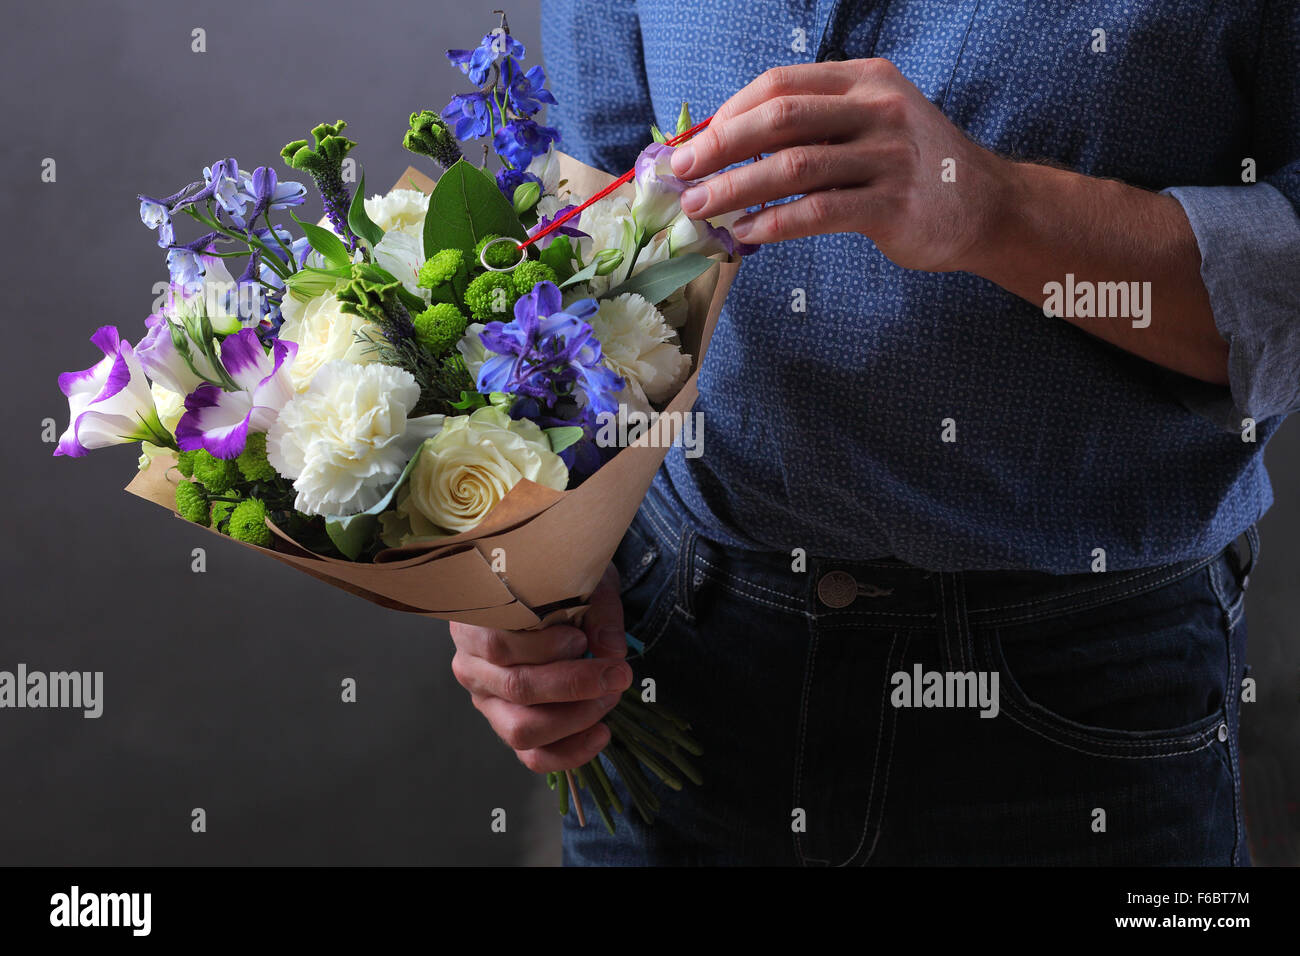 man holding a bouquet of flowers, a man makes a proposal to a woman, a lover of flowers and a ring, love note hidden in the flowers, note mistress, Stock Photo